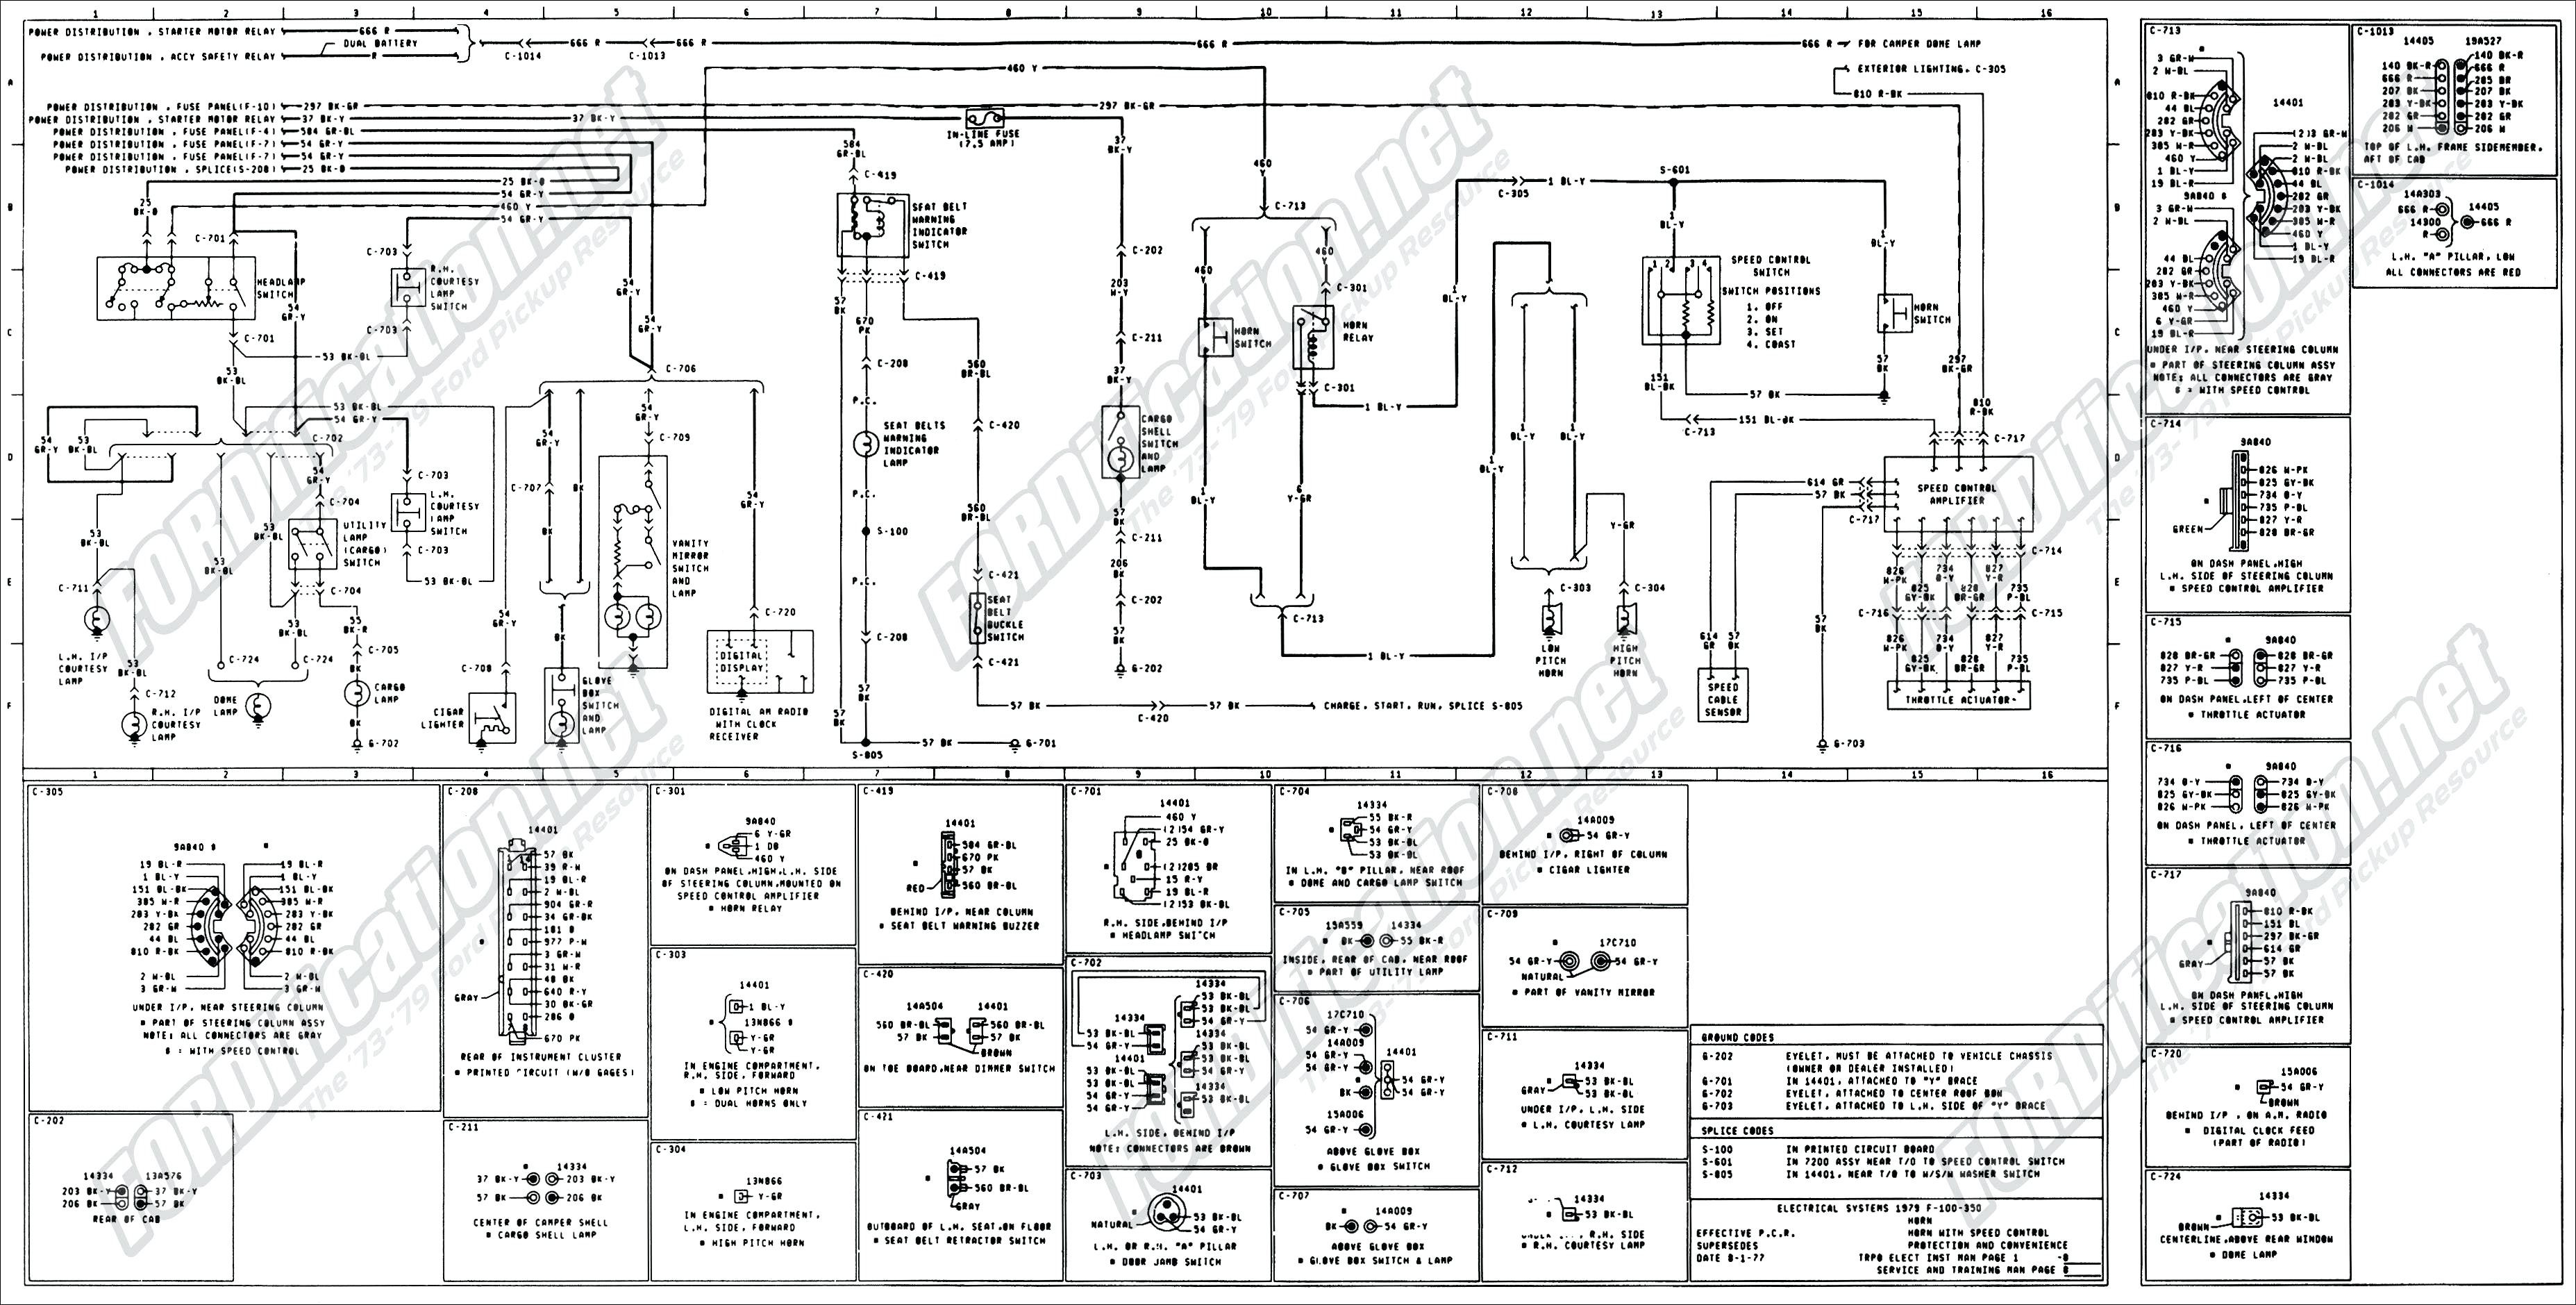 Full Size of Wiring Diagram Wiring Diagram Ford Radio Harness Factory Cargo Light Truck Enthusiasts